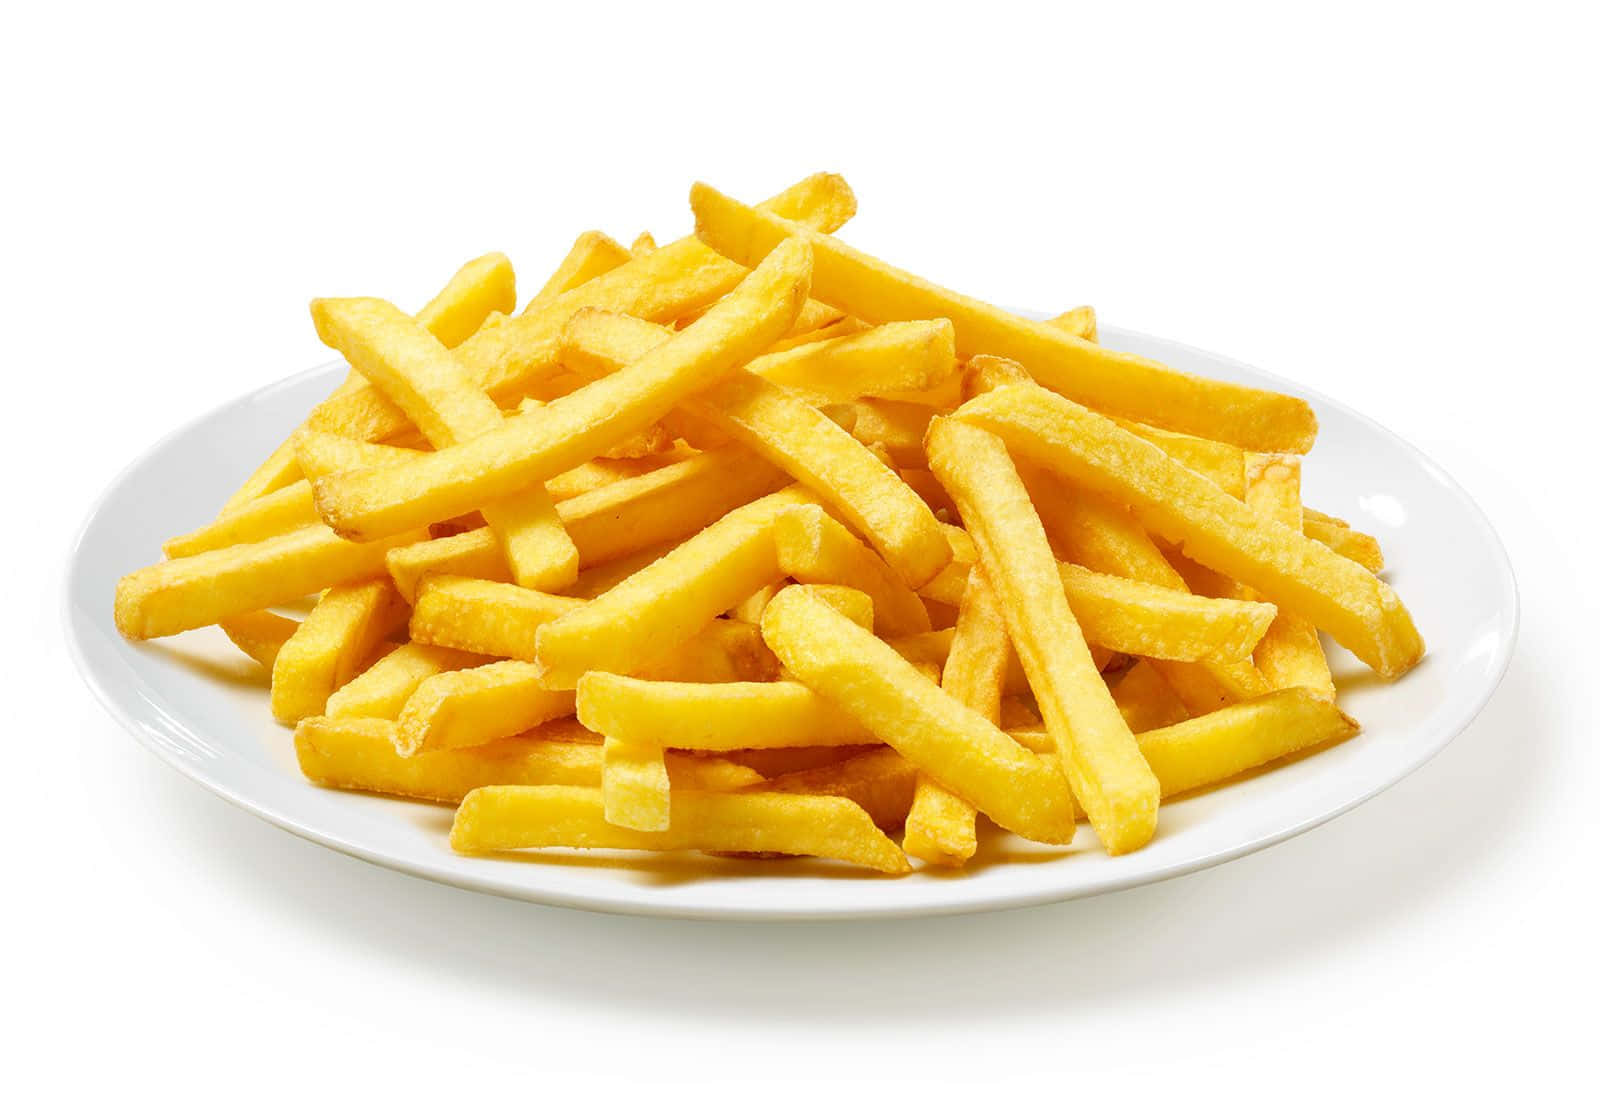 Try our delicious homemade French Fries!